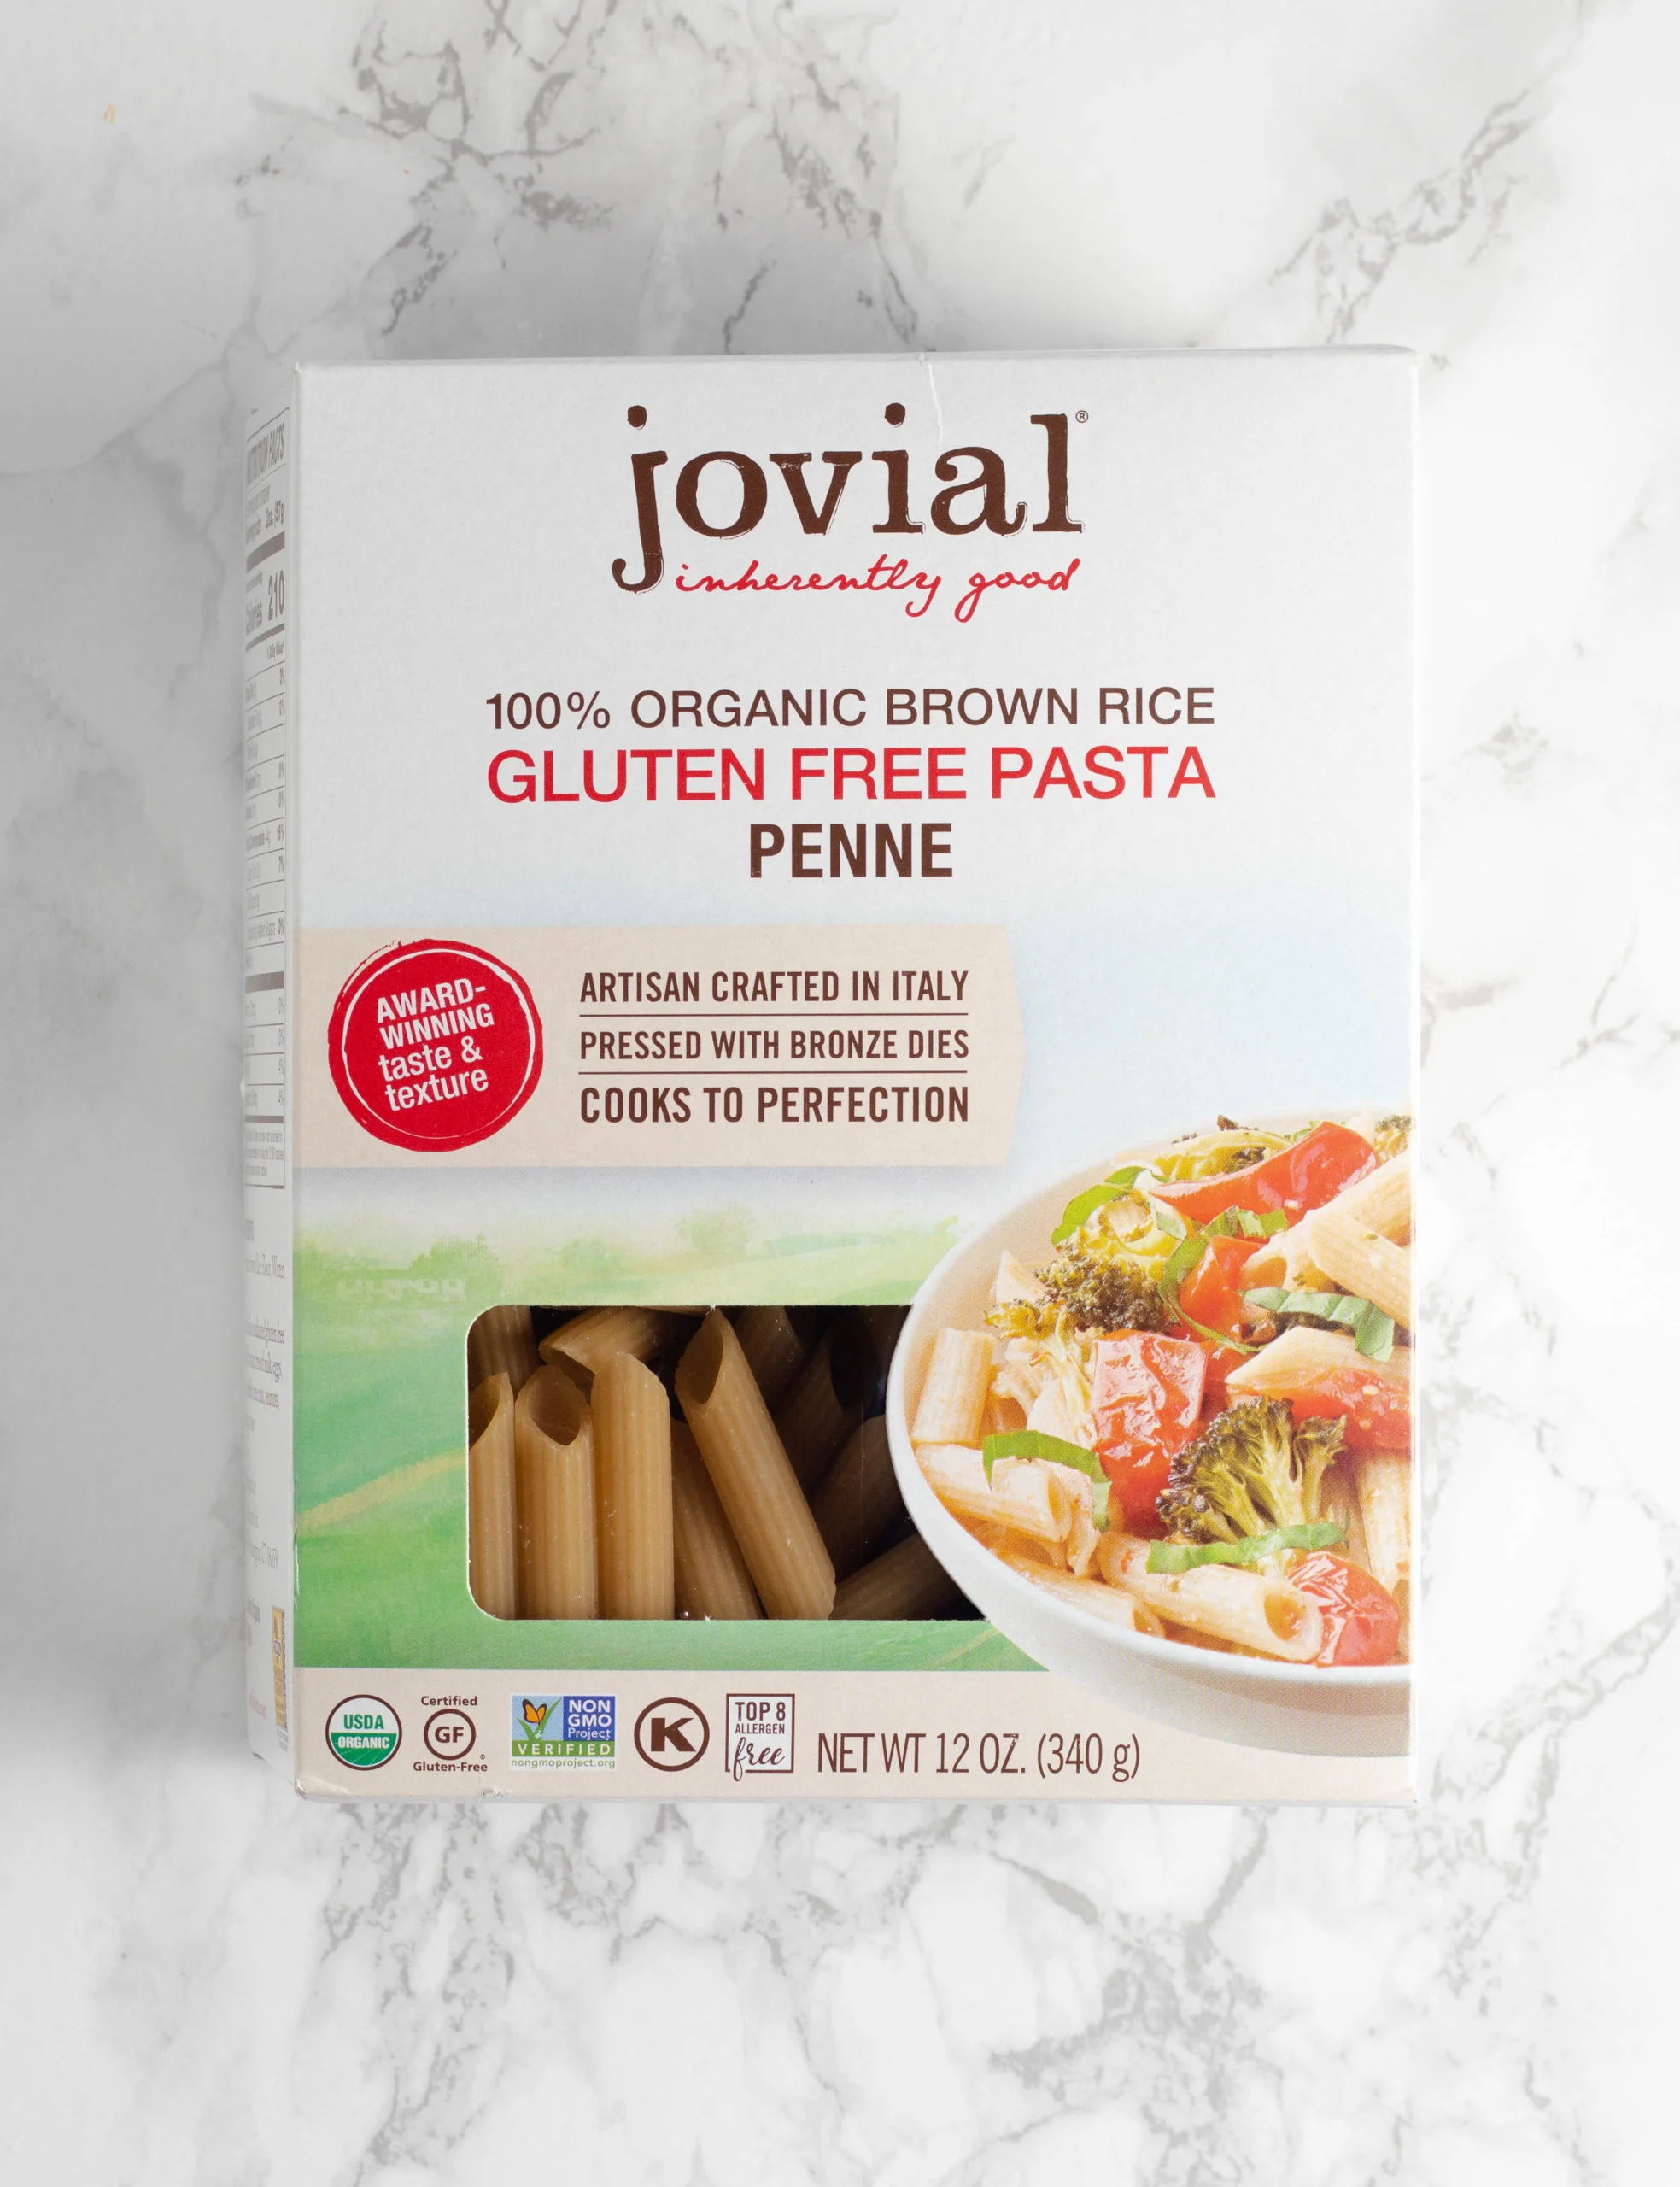 Brown rice flour pasta is a great alternative for lower carb and gluten free diets.